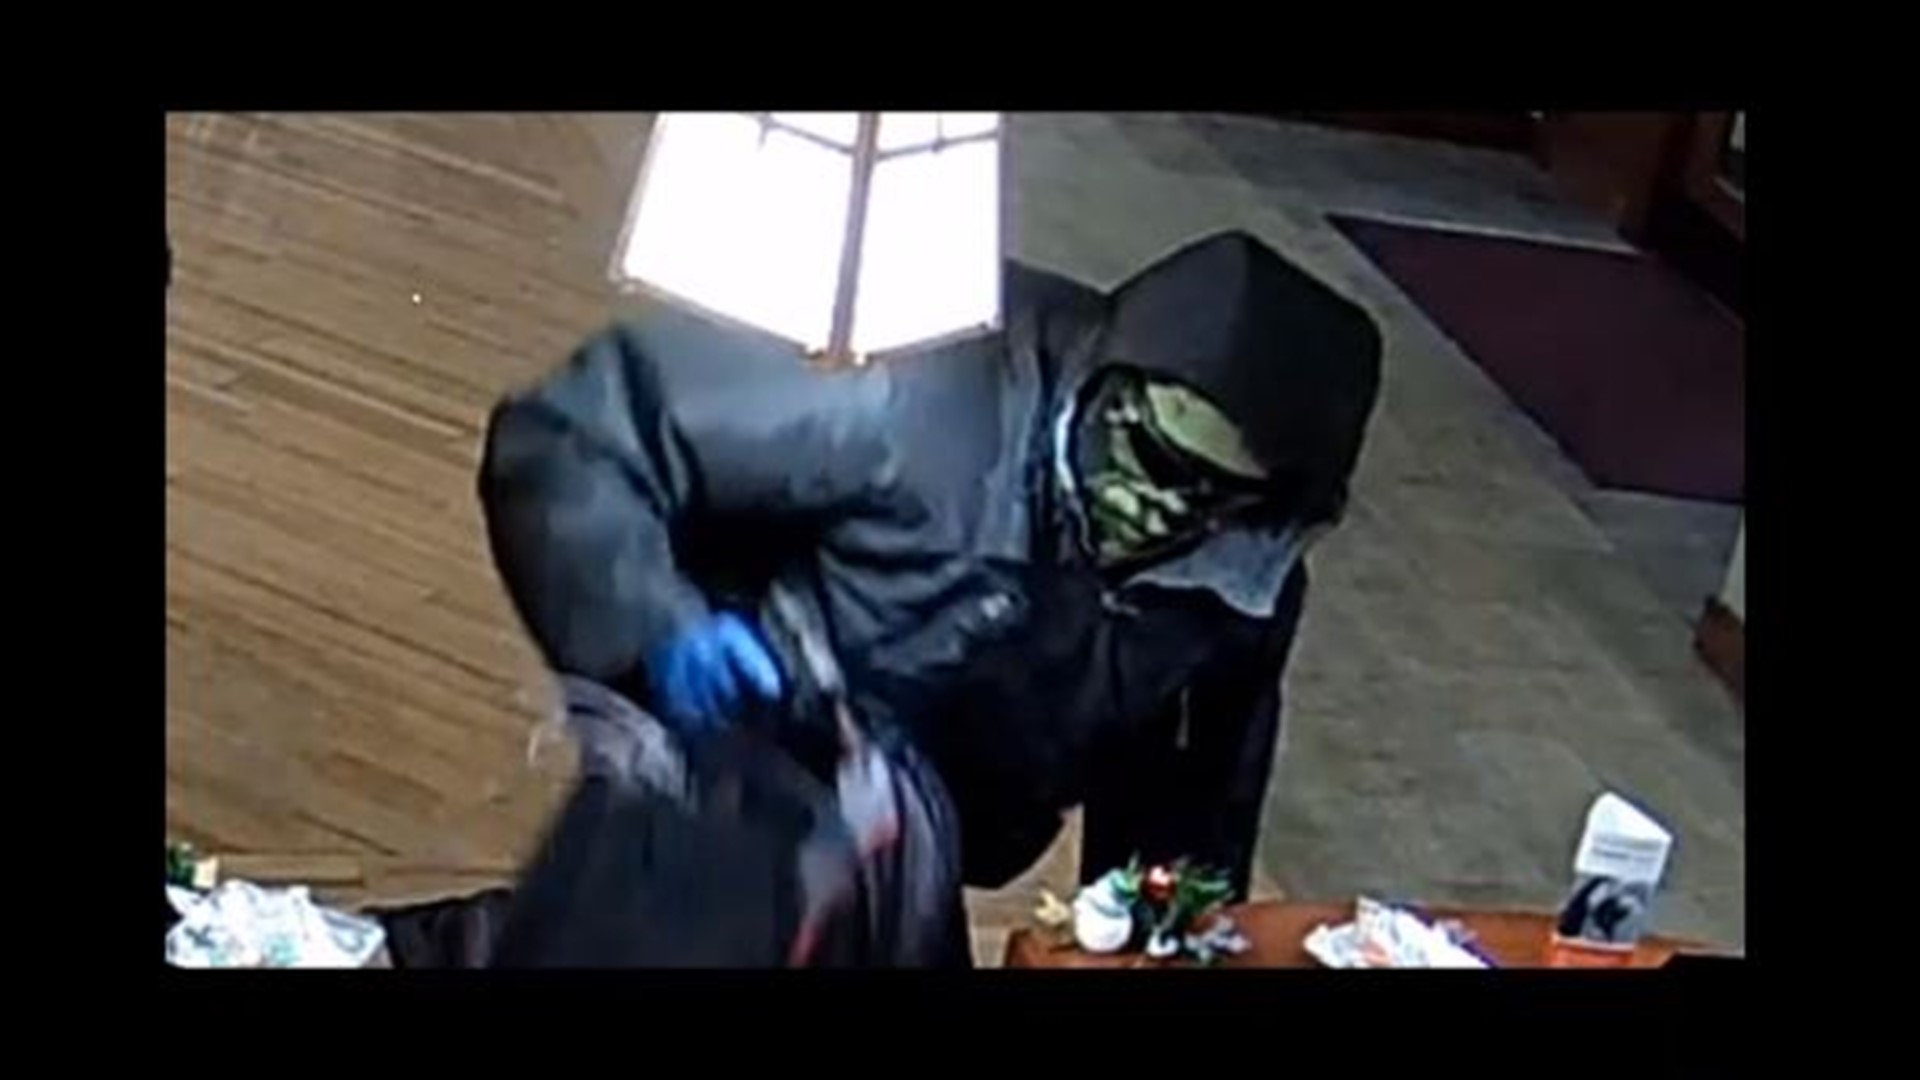 The FBI is offering a $15,000 reward for information leading to the arrest of the "Too Tall Bandit."